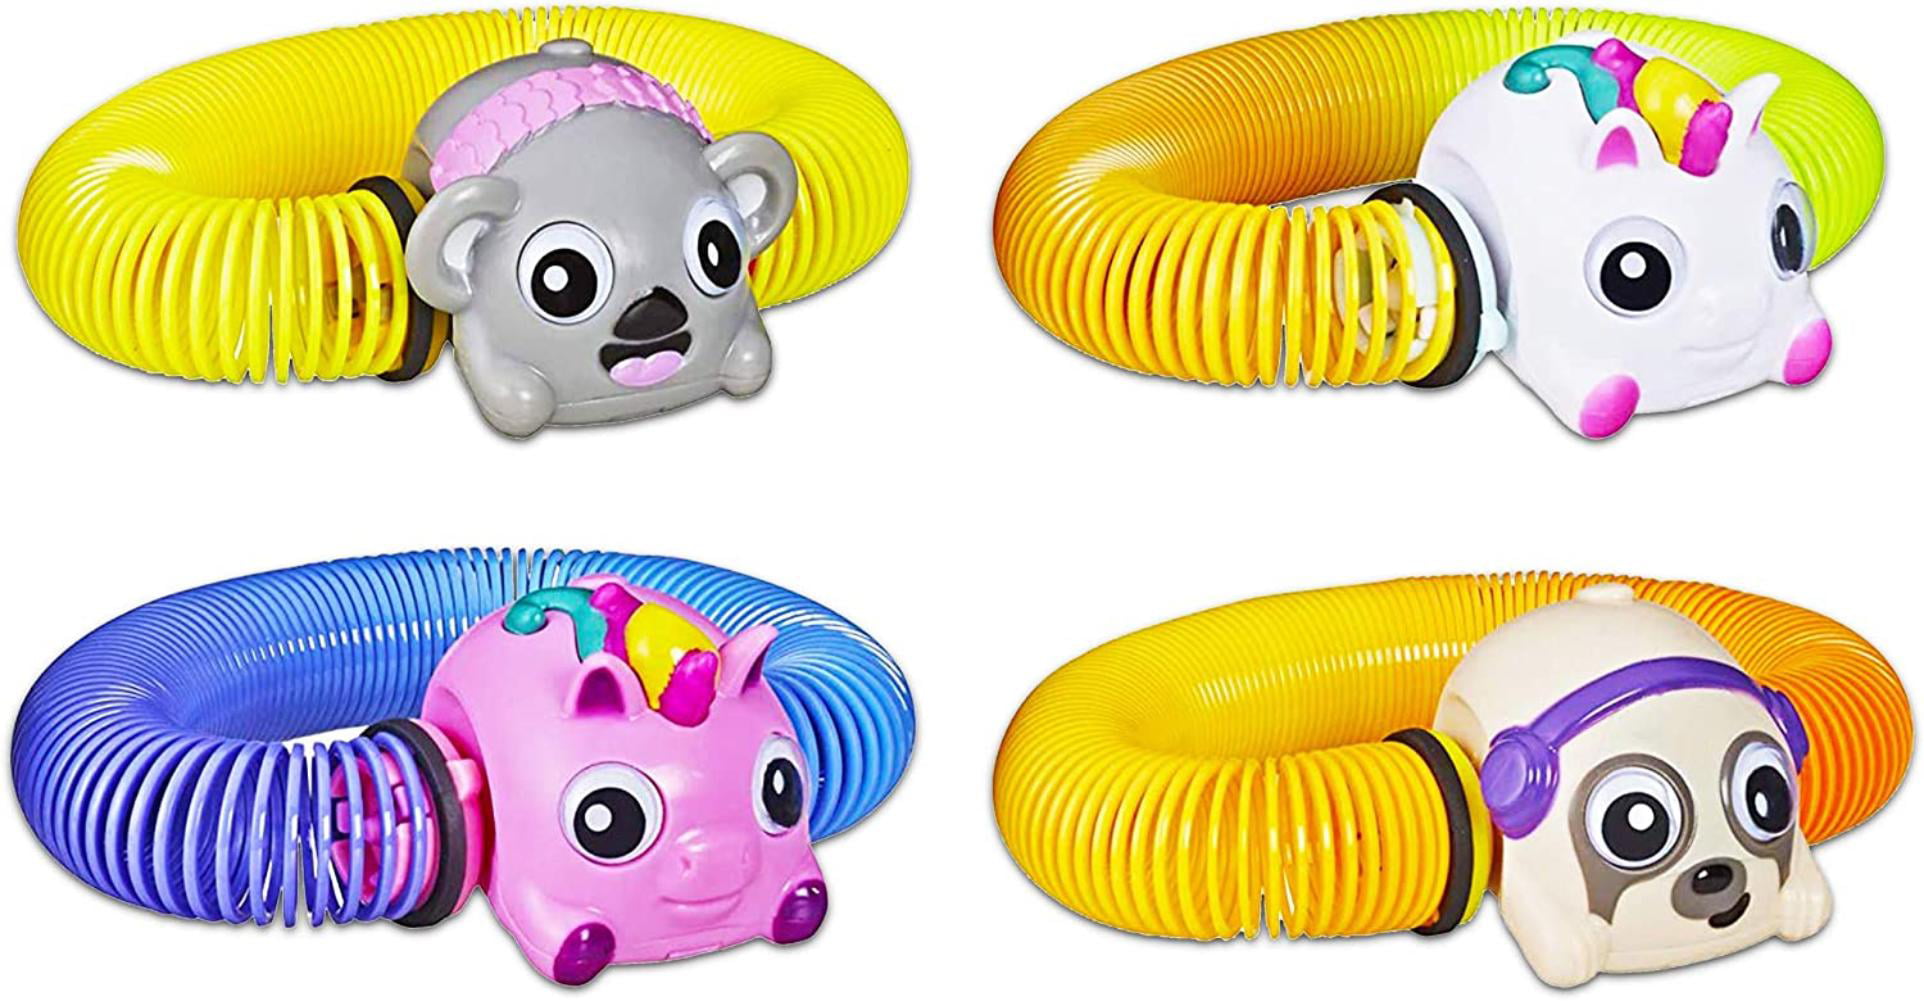 Zoops LOT OF 4 Electronic Twisting Zooming Climbing Toy Pet Toy Wacky Zooming 